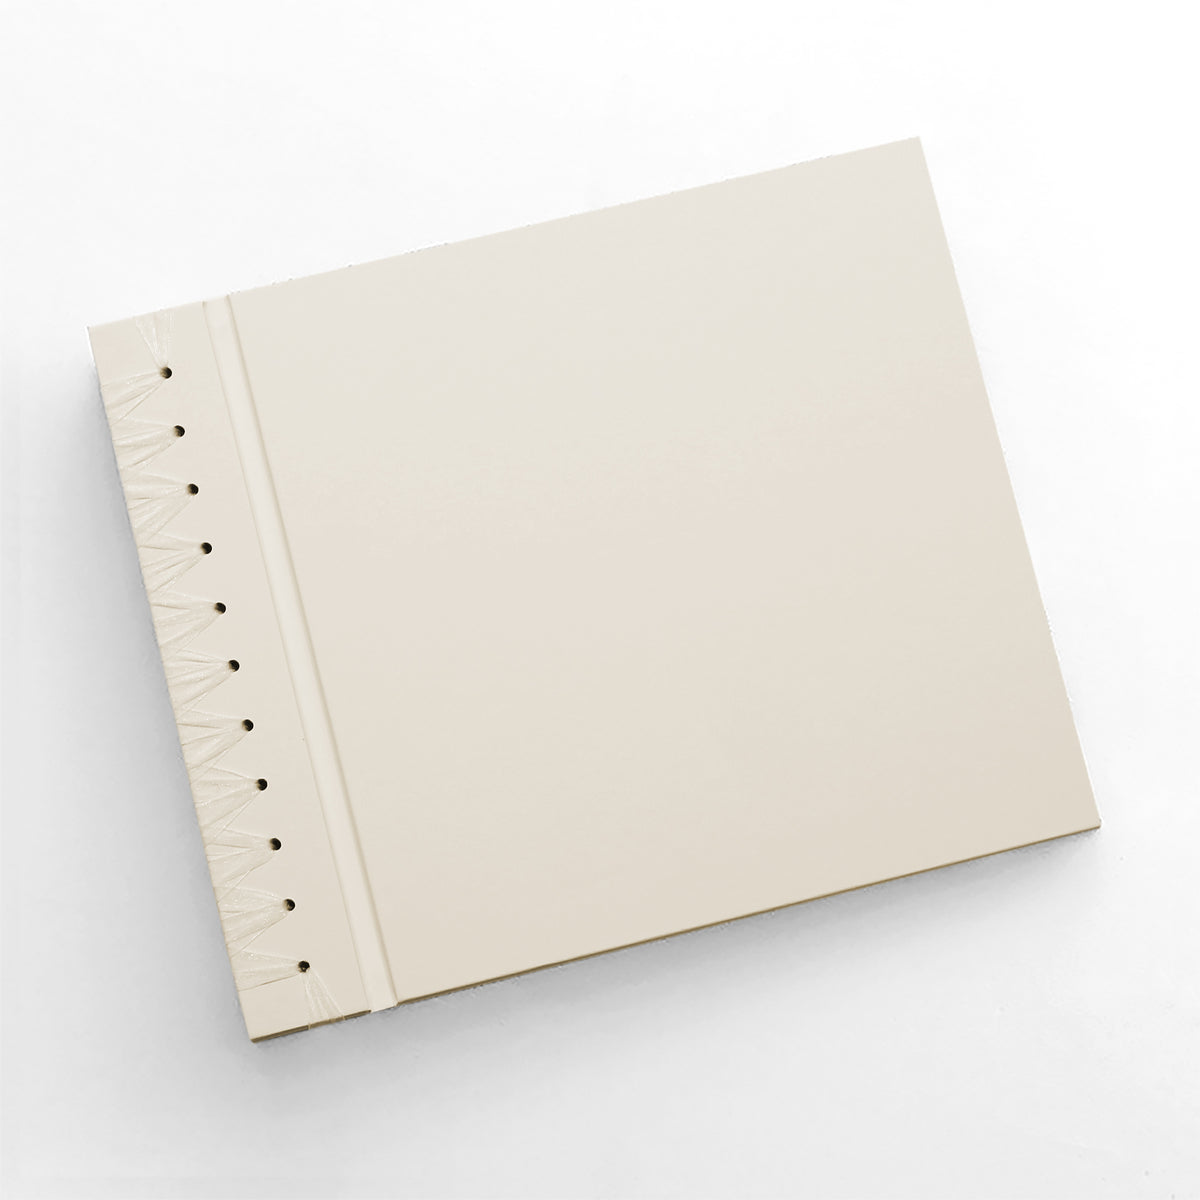 Deluxe 12 x 15 Paper Page Album | Cover: Pearl Vegan Leather | Available Personalized